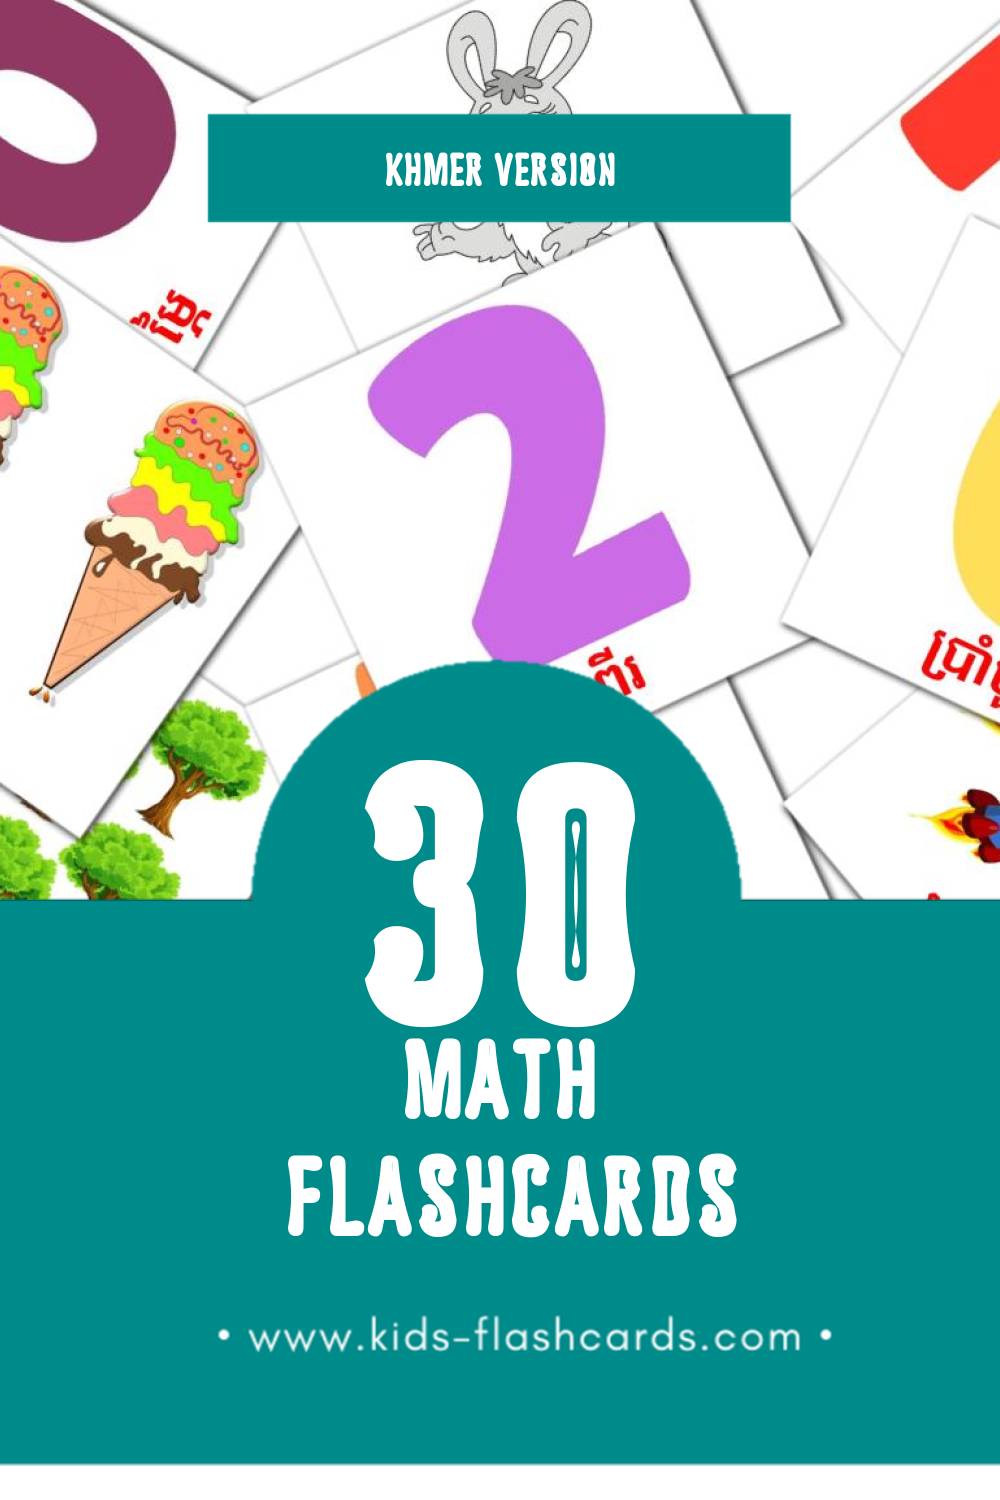 Visual គណិតវិទ្យា Flashcards for Toddlers (20 cards in Khmer)